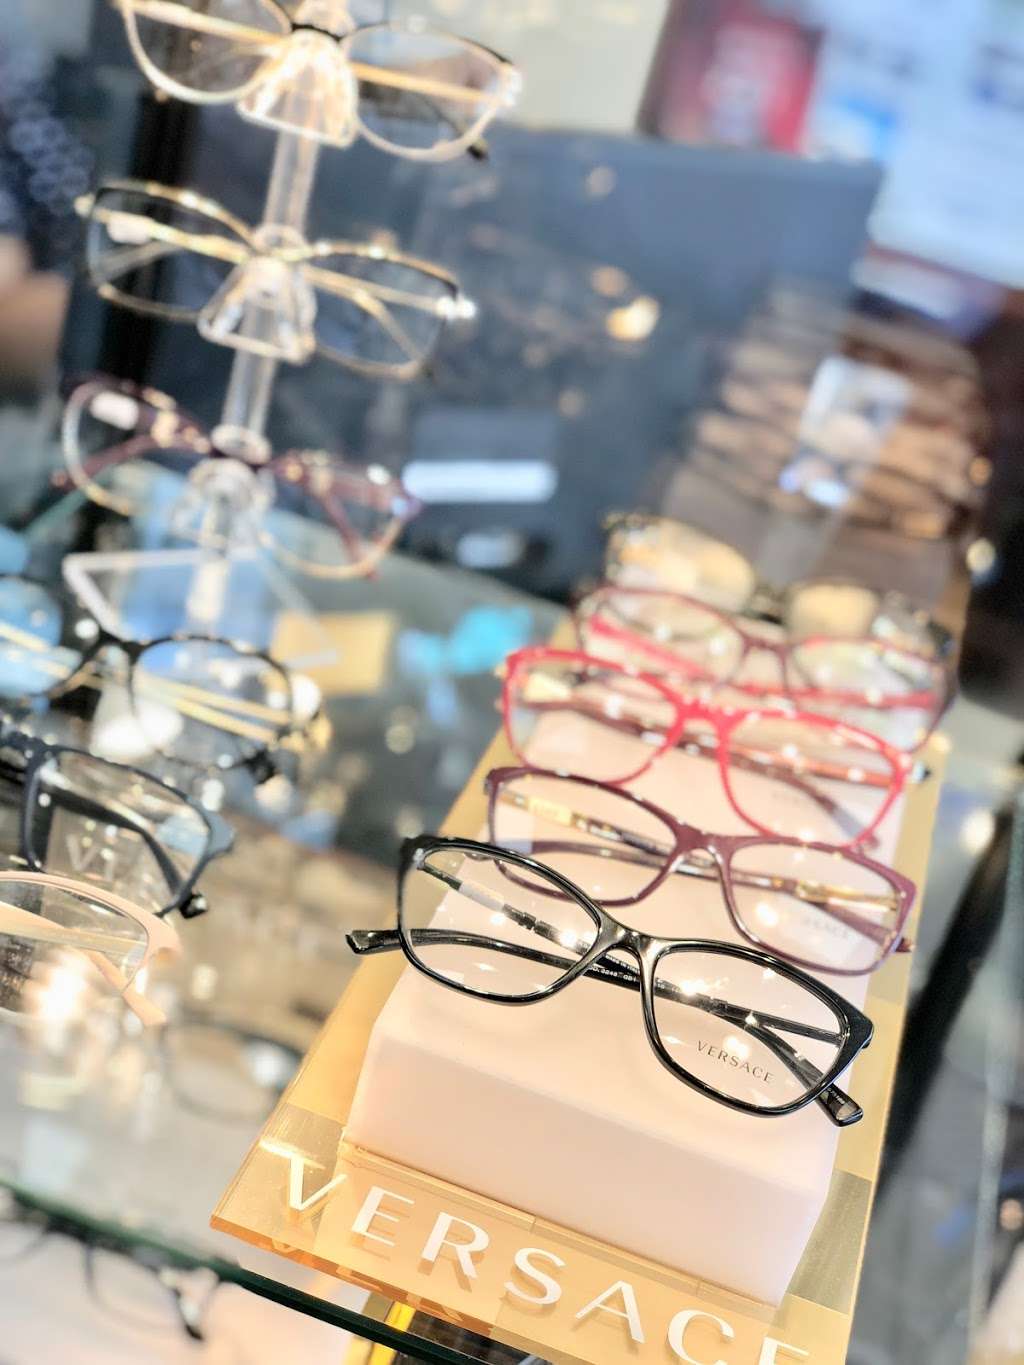 View Optical Eyeglasses Store | 4079 Mowry Ave, Fremont, CA 94538 | Phone: (510) 793-8997